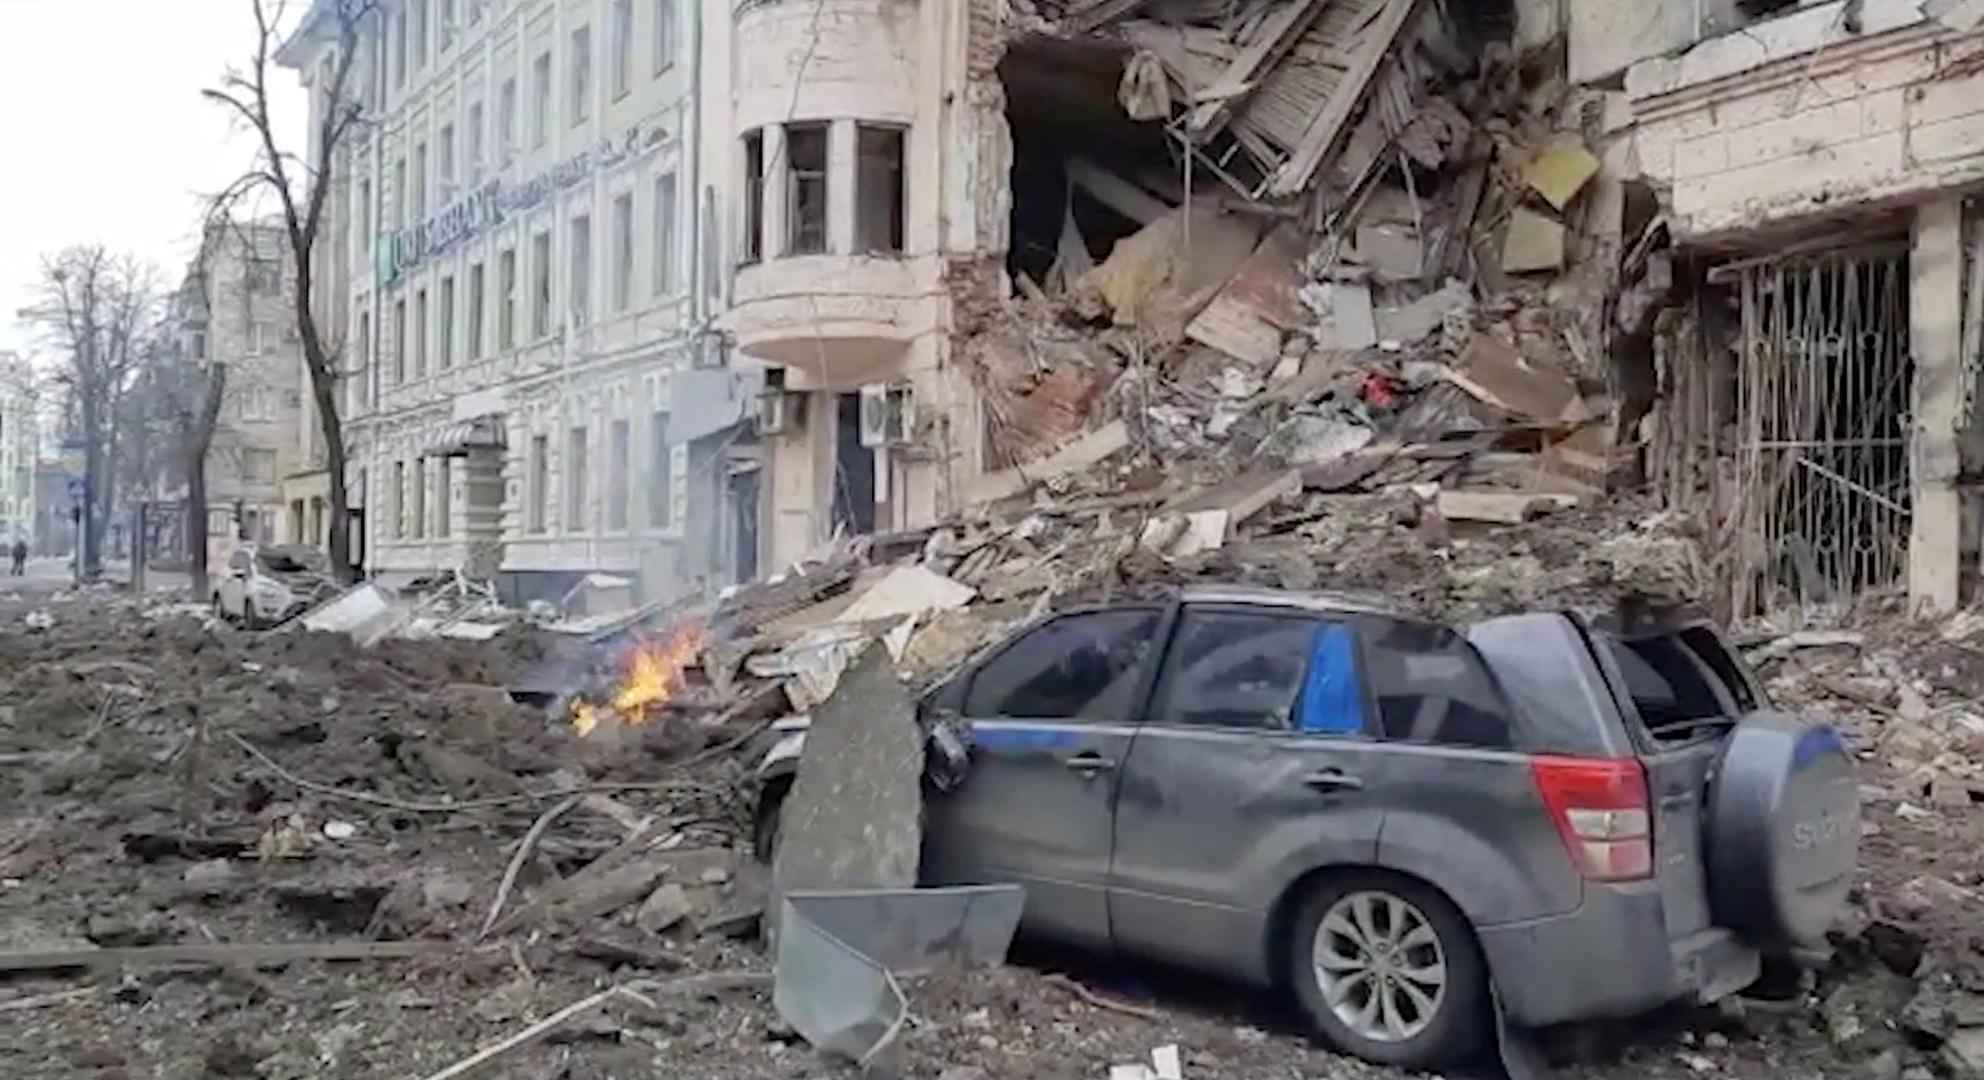 View of a crushed car amid the rubble as fire crews (not pictured) work after further attacks during Russia's invasion of Ukraine, in Kharkiv, March 14, 2022 in this still image from handout video. Courtesy of State Emergency Service of Ukraine/Handout via REUTERS THIS IMAGE HAS BEEN SUPPLIED BY A THIRD PARTY.